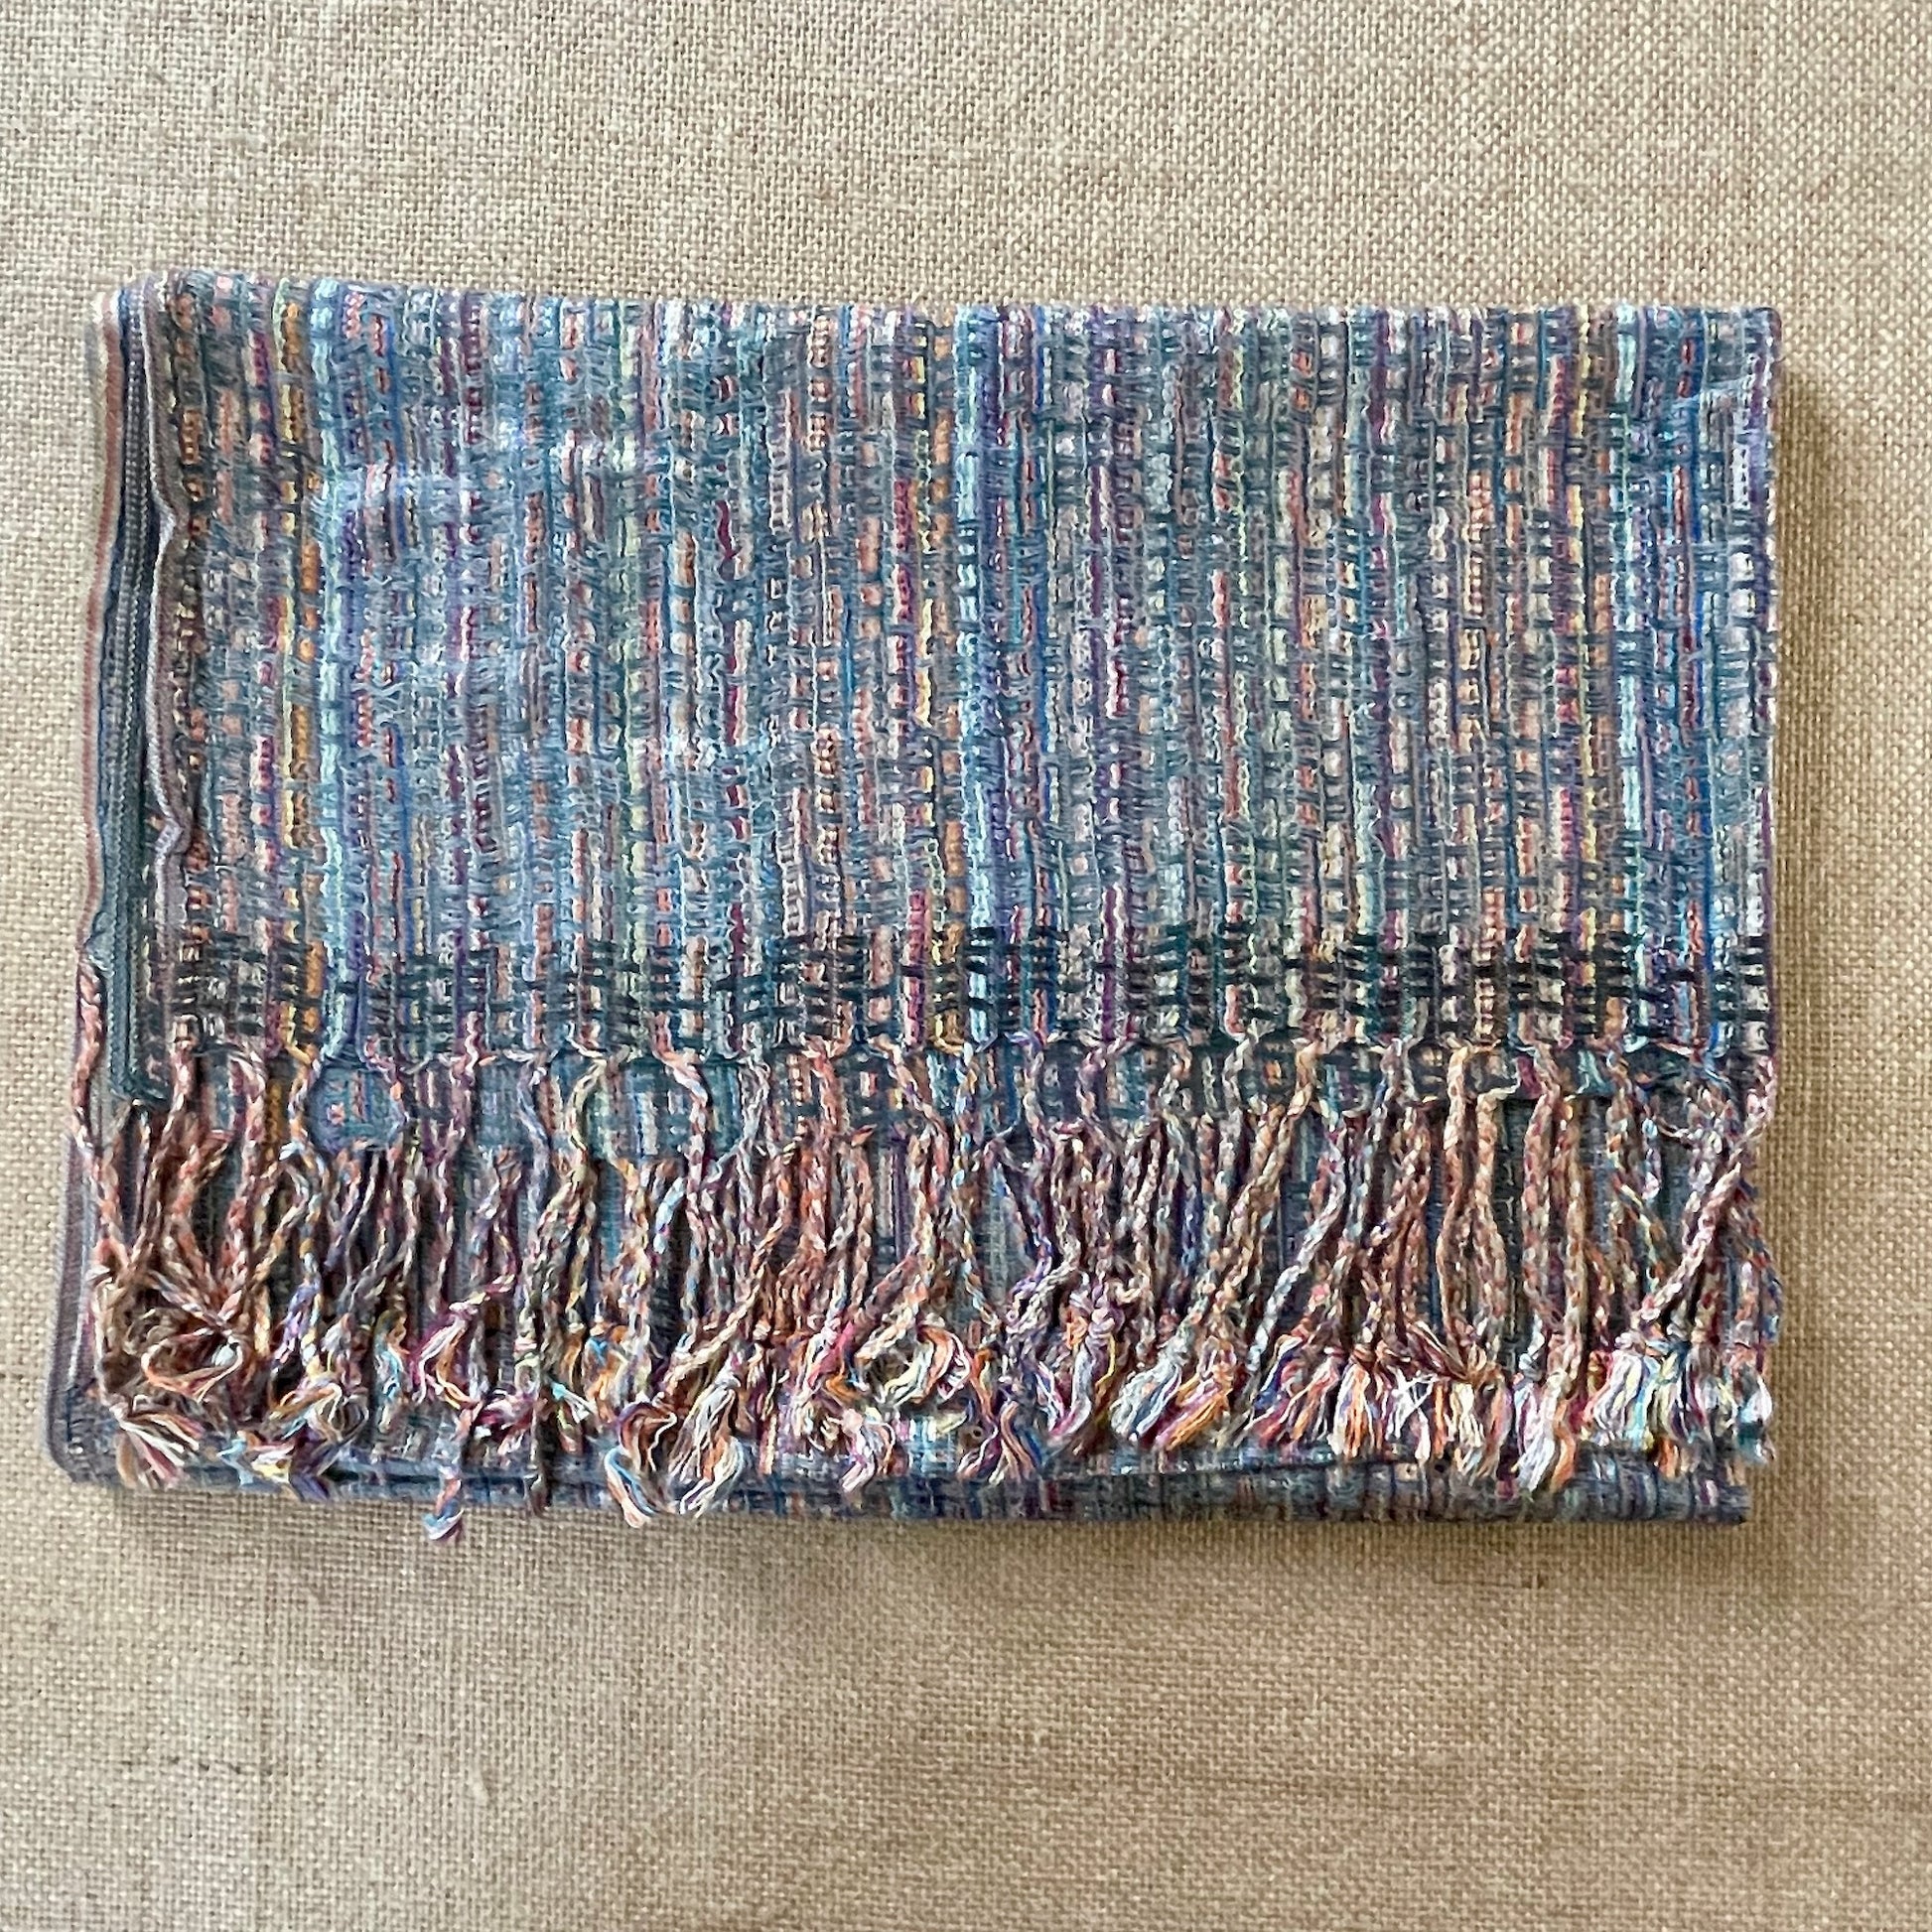 Woven Moroccan Pashmina Scarf in Sage Green folded